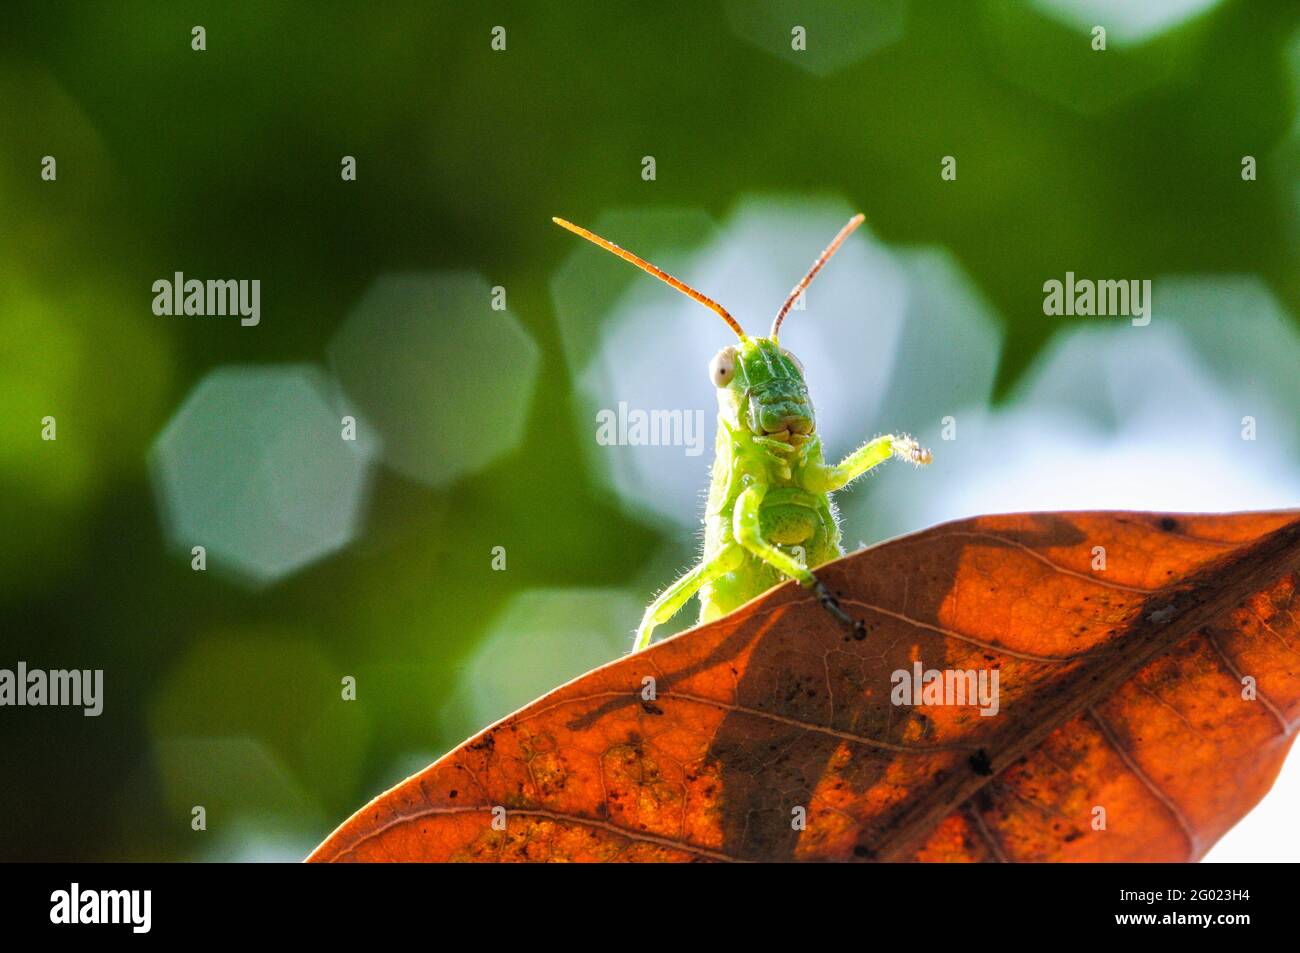 Green grasshopper hiding on the leaf against green nature background Stock Photo